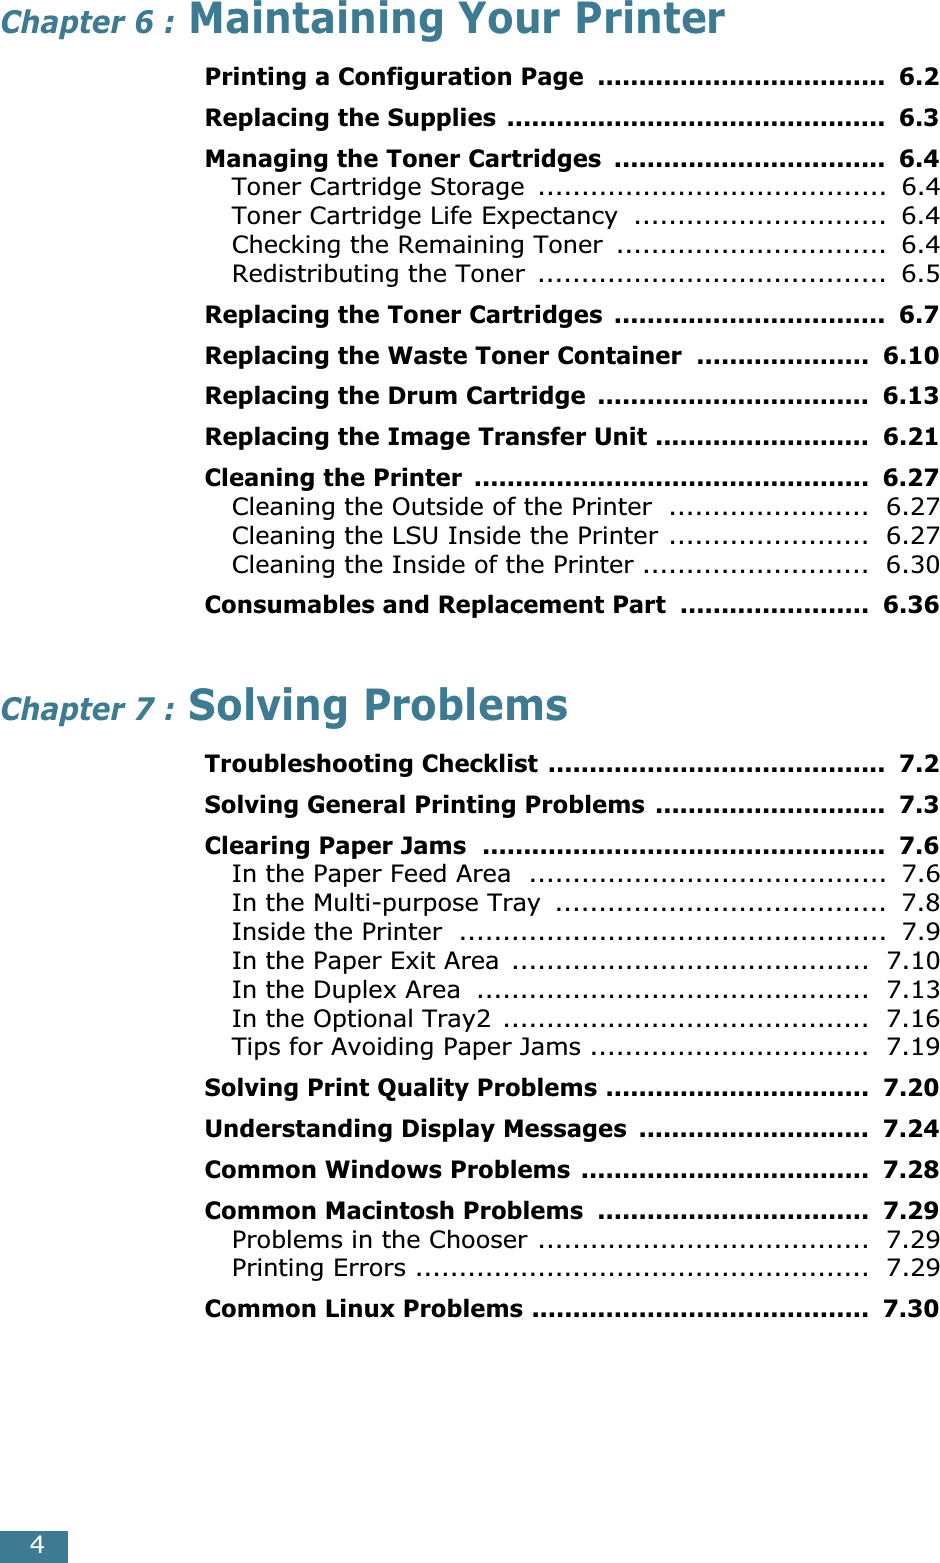  4 Chapter 6 :  Maintaining Your Printer Printing a Configuration Page  ...................................  6.2Replacing the Supplies ..............................................  6.3Managing the Toner Cartridges  .................................  6.4 Toner Cartridge Storage  ........................................  6.4Toner Cartridge Life Expectancy  .............................  6.4Checking the Remaining Toner  ...............................  6.4Redistributing the Toner  ........................................  6.5 Replacing the Toner Cartridges  .................................  6.7Replacing the Waste Toner Container  .....................  6.10Replacing the Drum Cartridge  .................................  6.13Replacing the Image Transfer Unit ..........................  6.21Cleaning the Printer  ................................................  6.27 Cleaning the Outside of the Printer  .......................  6.27Cleaning the LSU Inside the Printer .......................  6.27Cleaning the Inside of the Printer ..........................  6.30 Consumables and Replacement Part  .......................  6.36 Chapter 7 :  Solving Problems Troubleshooting Checklist .........................................  7.2Solving General Printing Problems ............................  7.3Clearing Paper Jams  .................................................  7.6 In the Paper Feed Area  .........................................  7.6In the Multi-purpose Tray  ......................................  7.8Inside the Printer  .................................................  7.9In the Paper Exit Area  .........................................  7.10In the Duplex Area  .............................................  7.13In the Optional Tray2 ..........................................  7.16Tips for Avoiding Paper Jams ................................  7.19 Solving Print Quality Problems ................................  7.20Understanding Display Messages  ............................  7.24Common Windows Problems ...................................  7.28Common Macintosh Problems  .................................  7.29 Problems in the Chooser ......................................  7.29Printing Errors ....................................................  7.29 Common Linux Problems .........................................  7.30